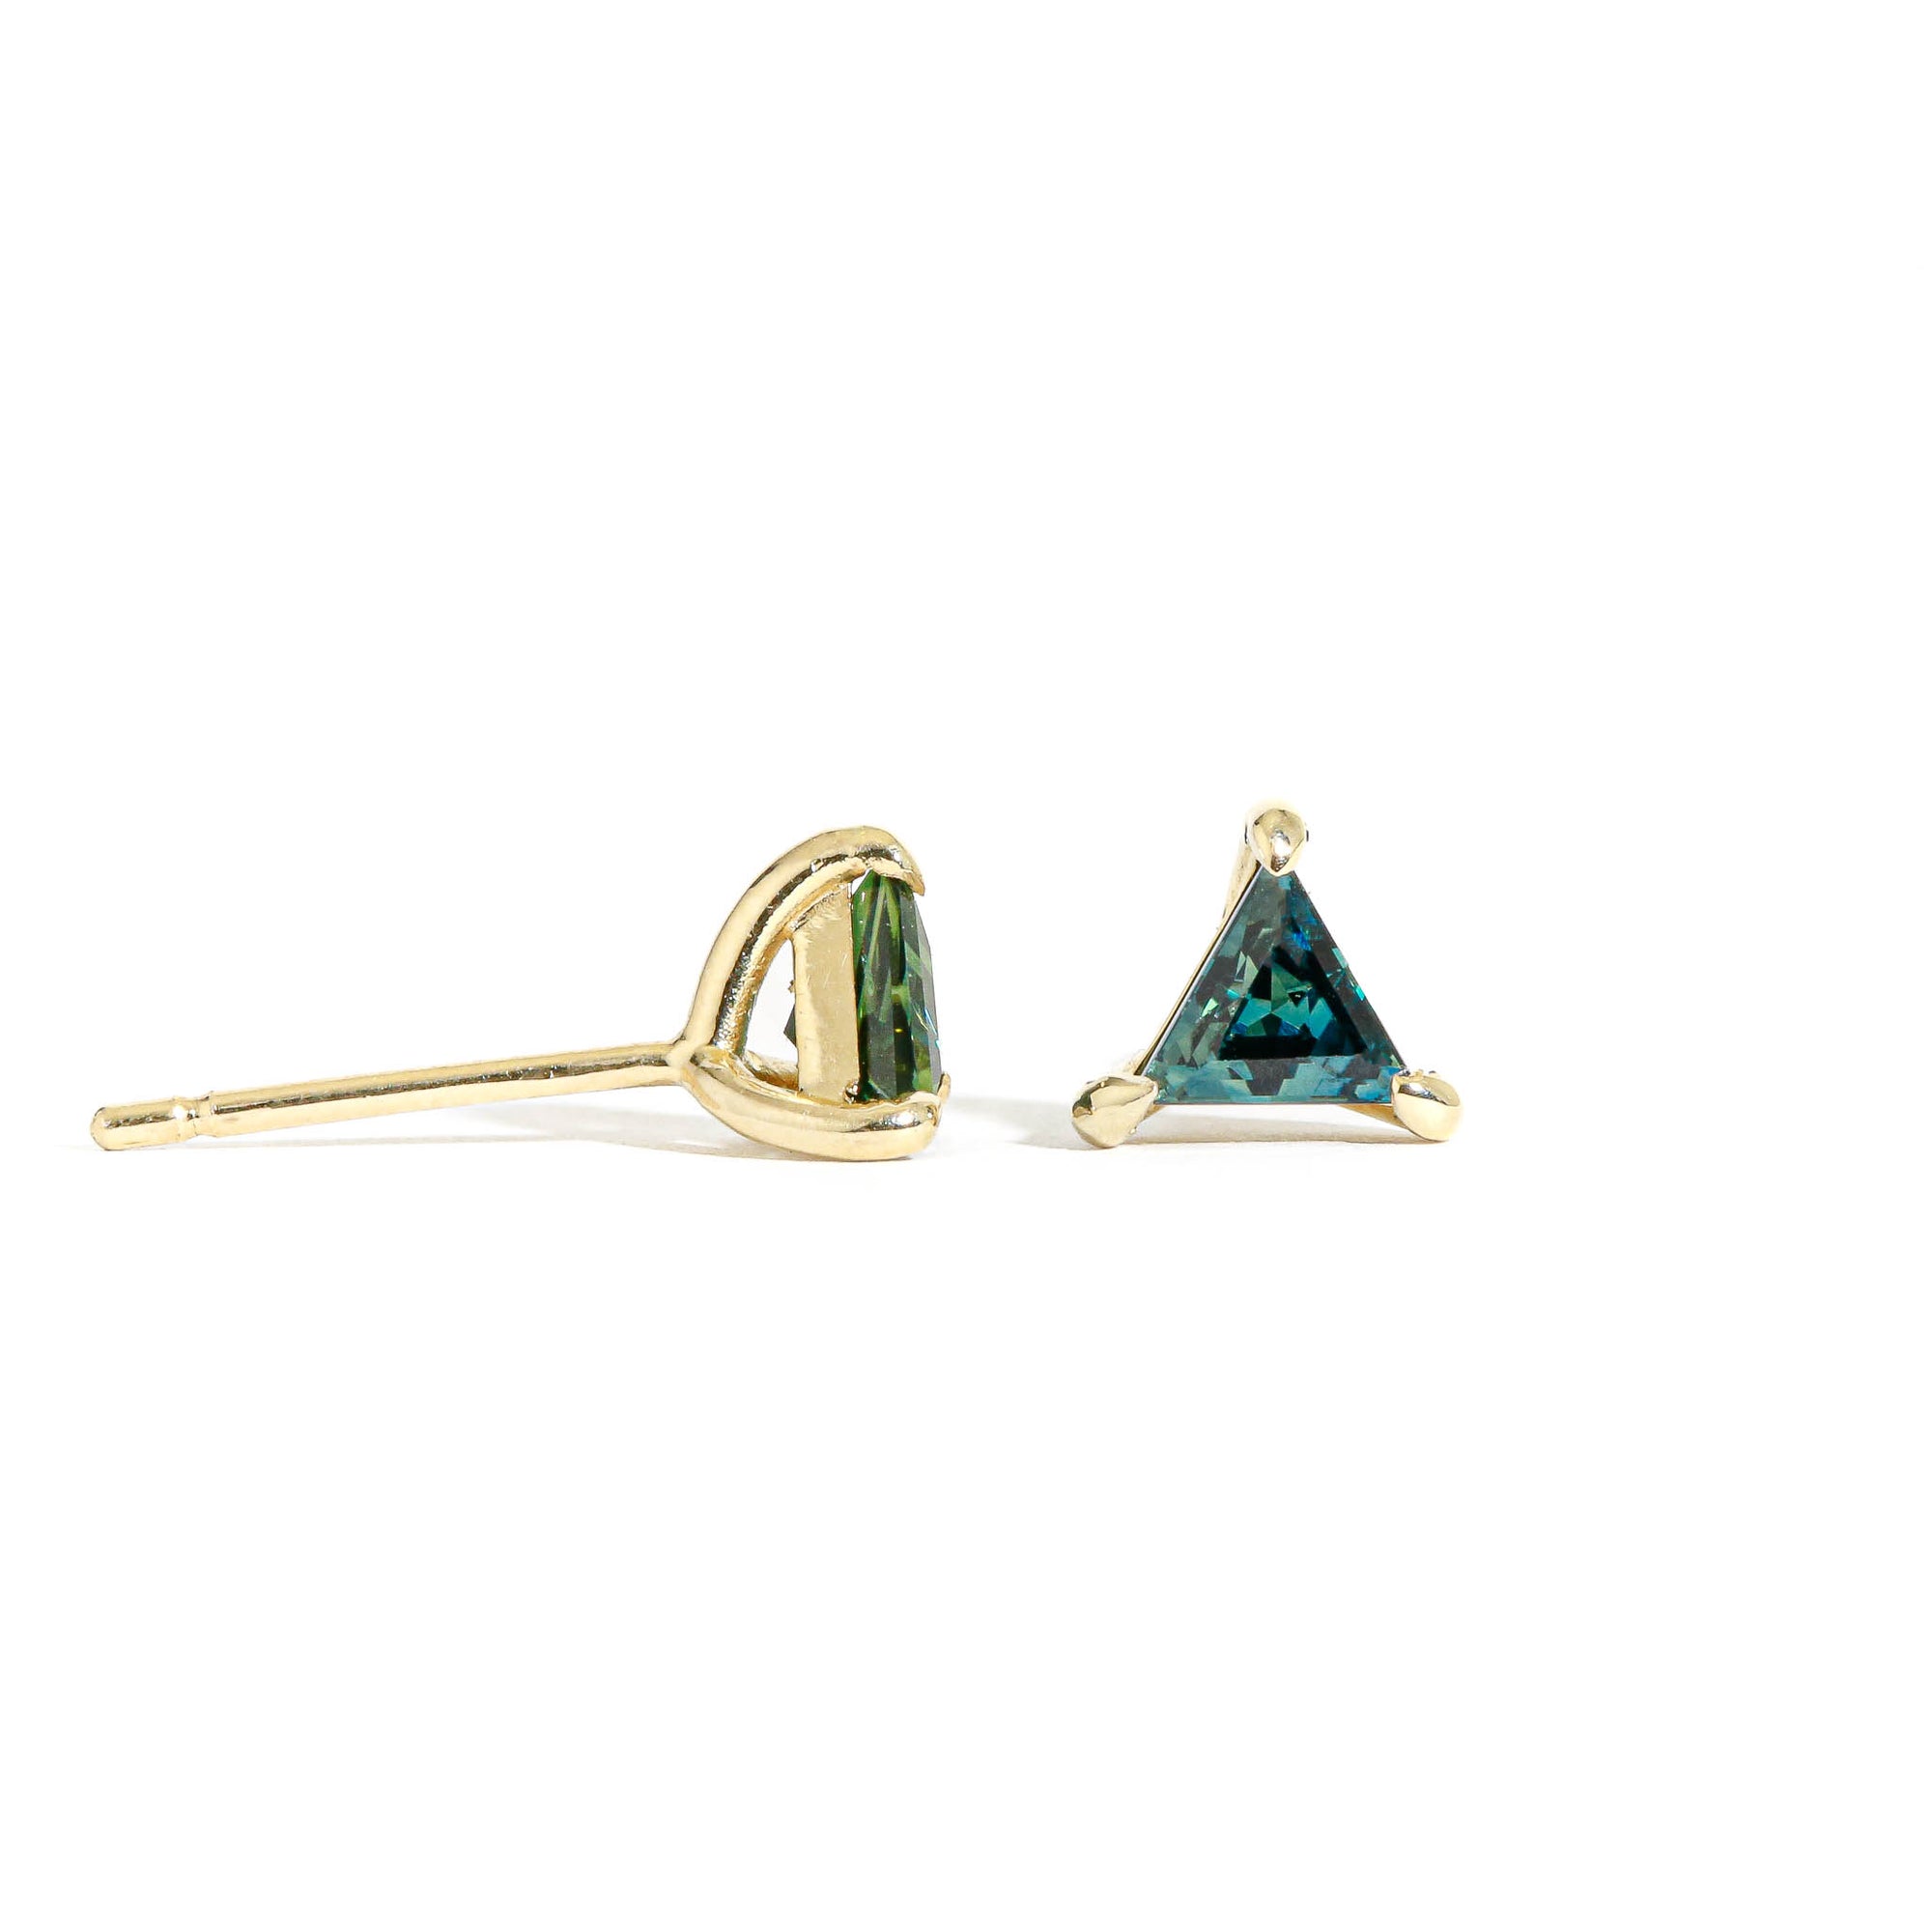 9 carat yellow gold earrings, each featuring one trilliant cut, ethically sourced Australian teal sapphire. 